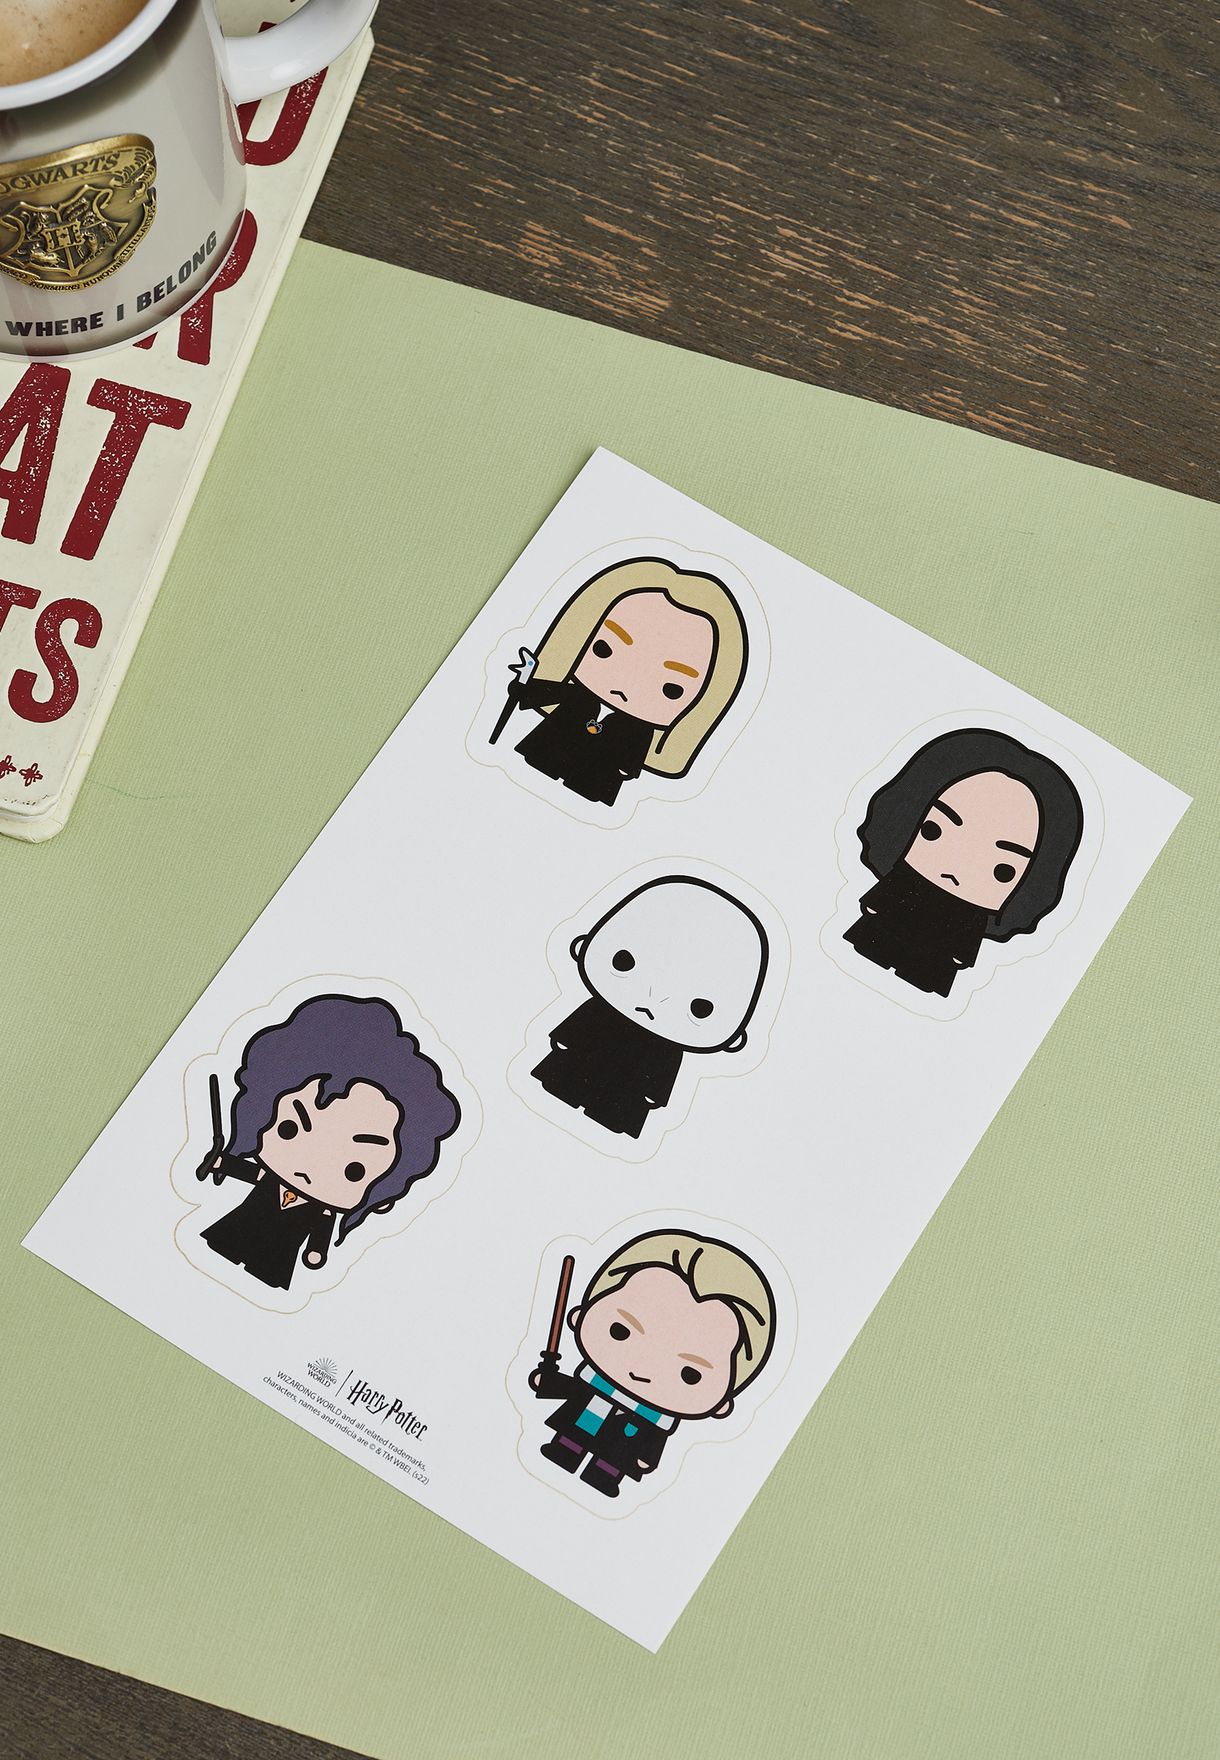 Harry Potter Sticker Sheet - Characters